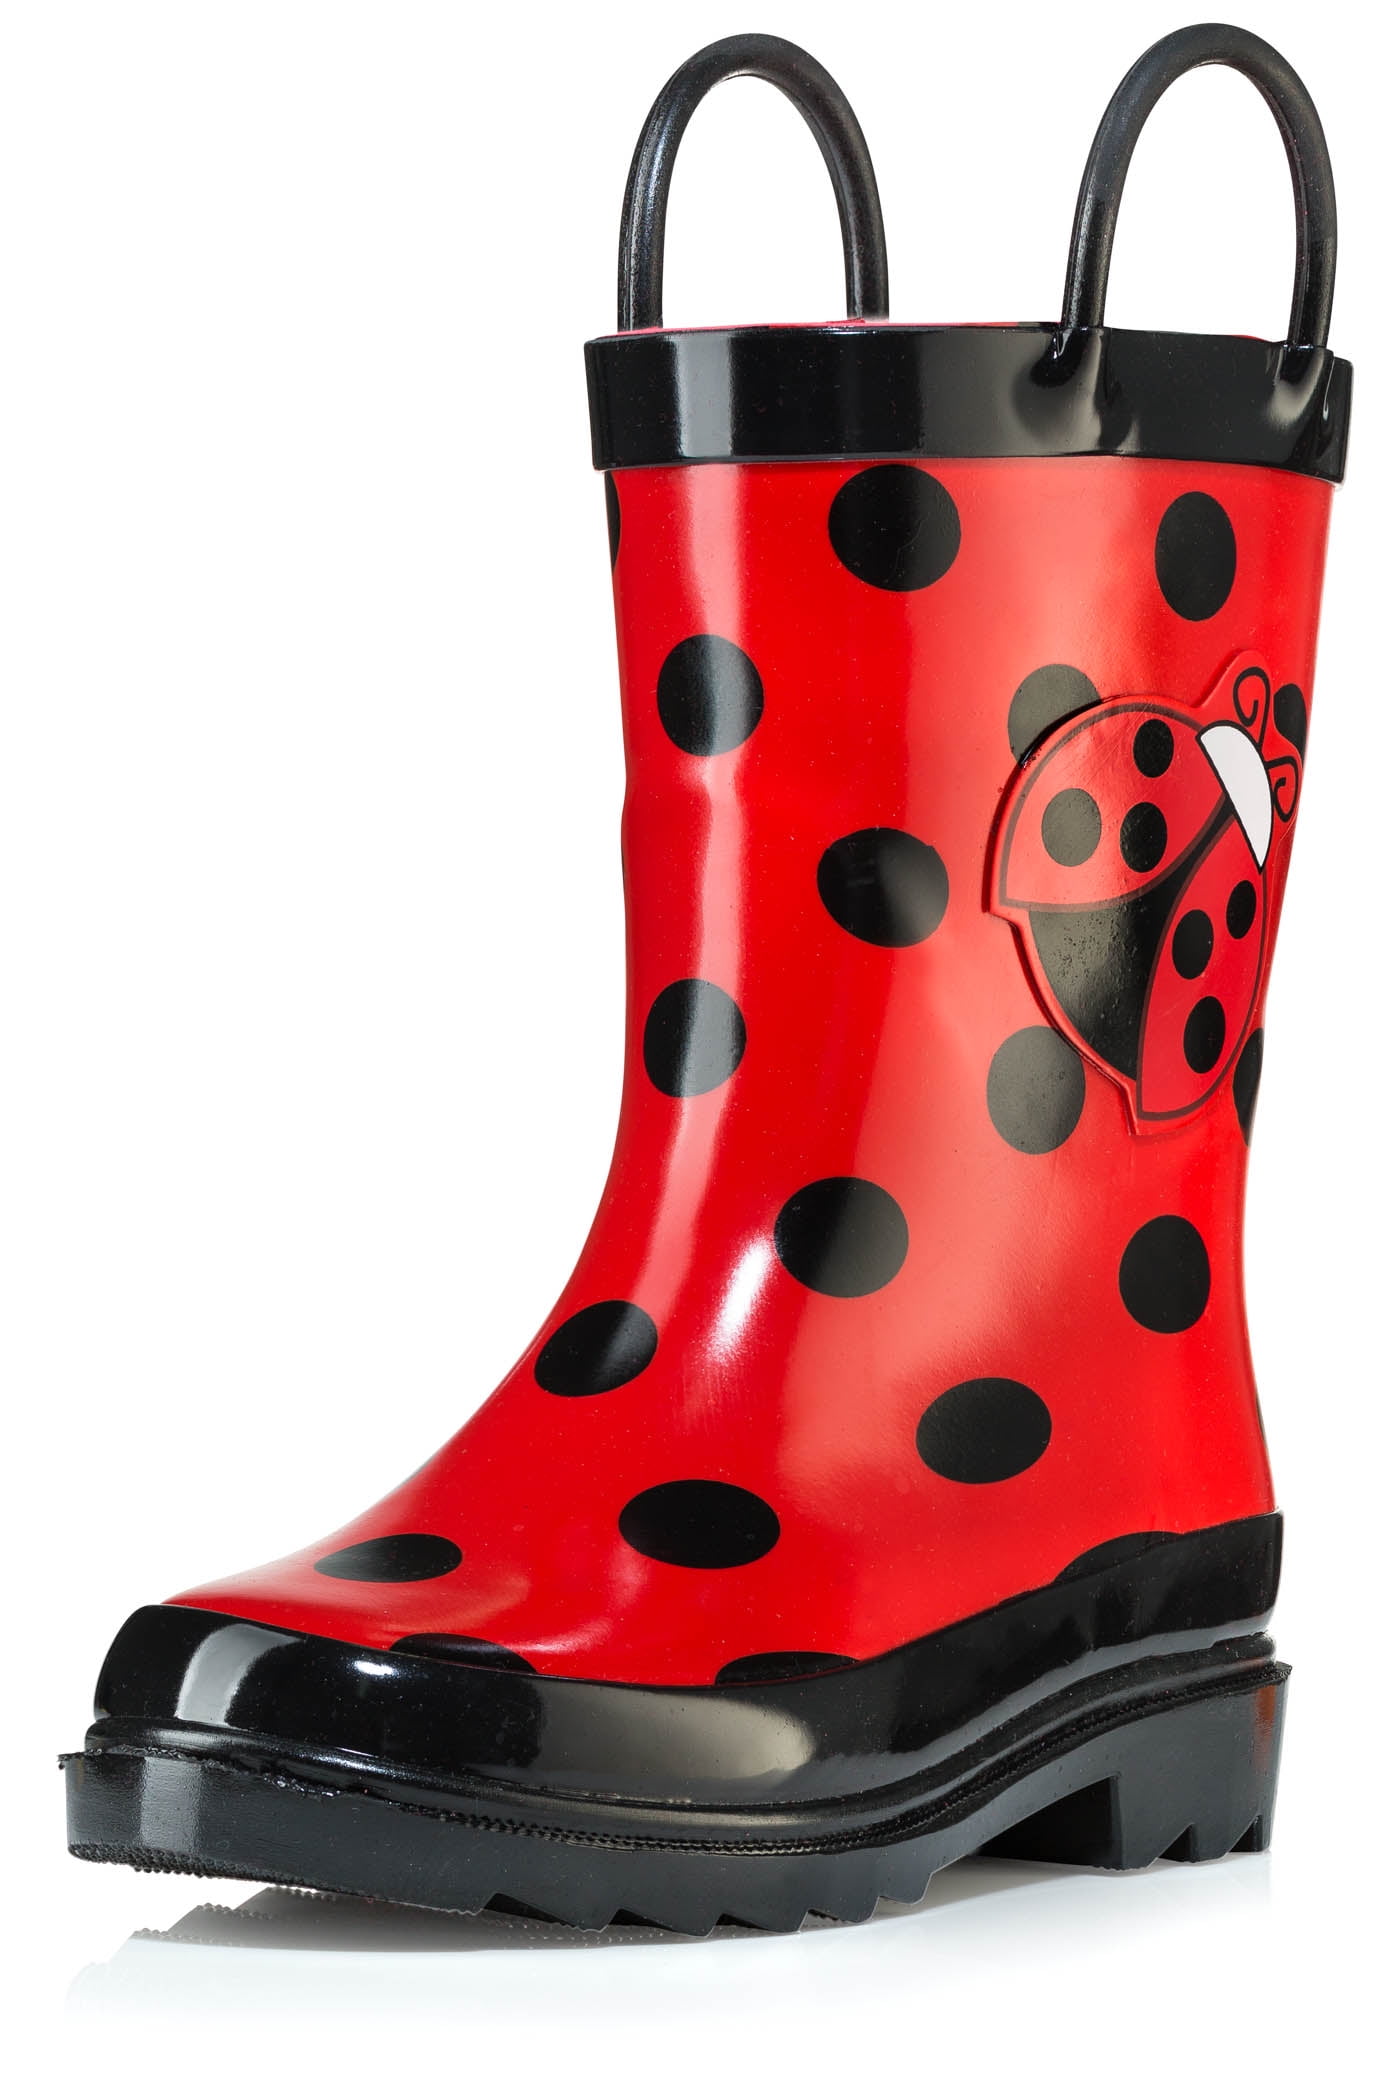 Boys and Girls Colors and Designs by Puddle Play Toddler and Kids Rain Boots with Easy On Handles 